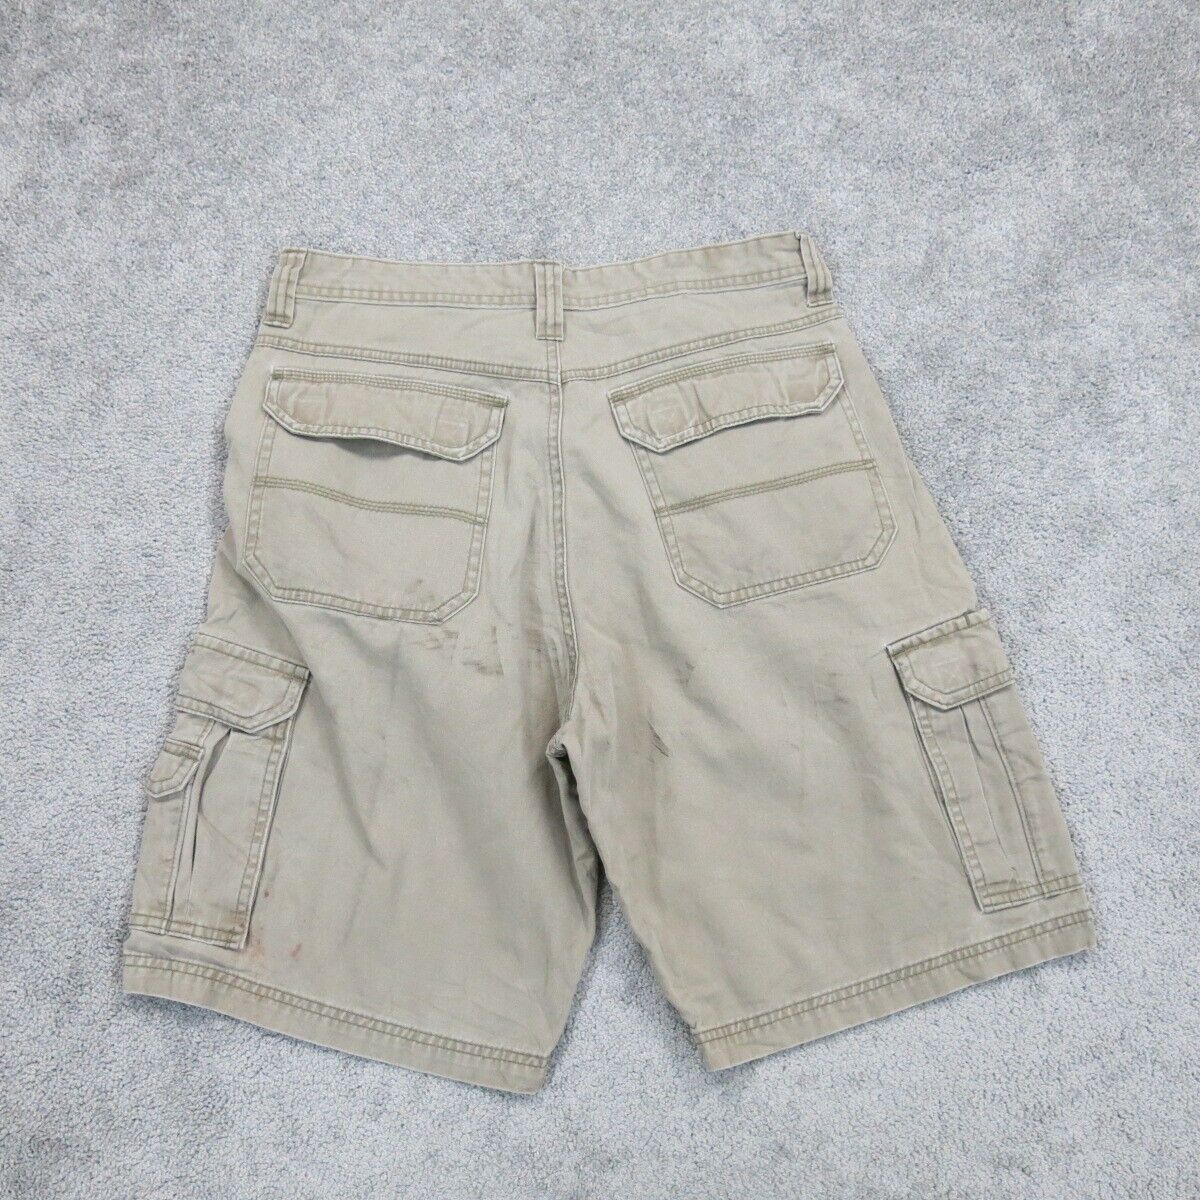 Wrangler Mens Cargo Shorts High Rise Outdoor 100% Cotton Solid Beige Size 32